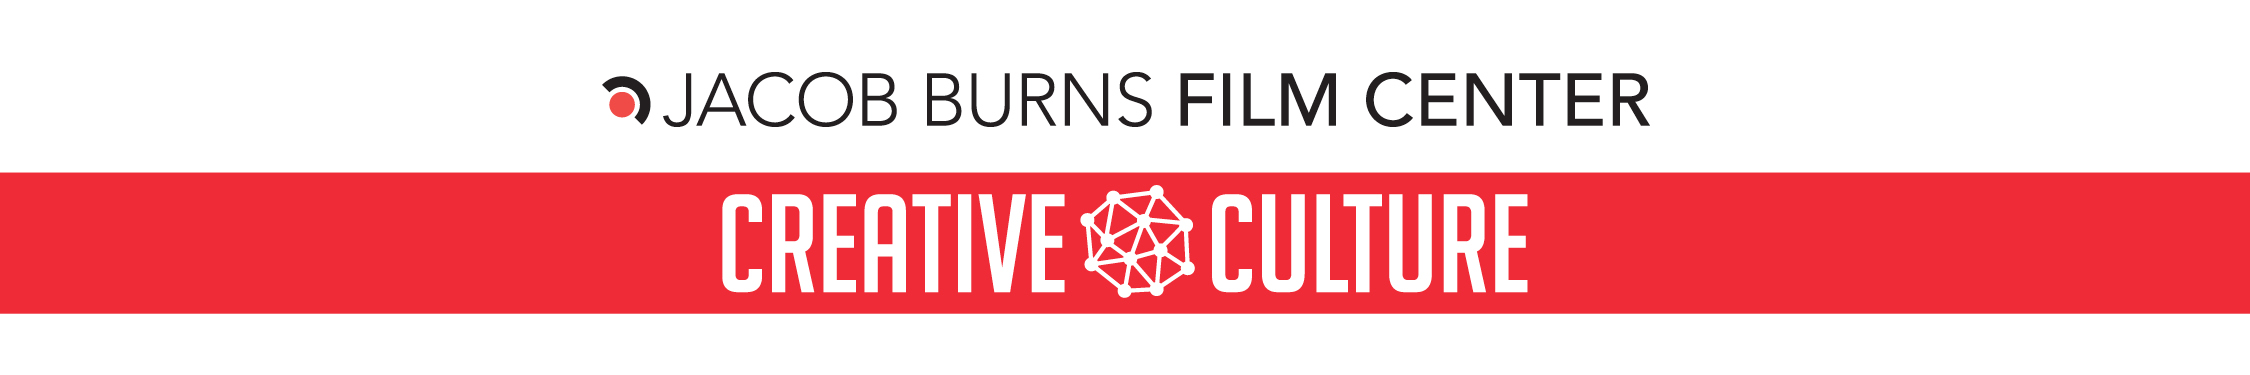 header that reads Jacob Burns Film Center Creative Culture red and black on white background